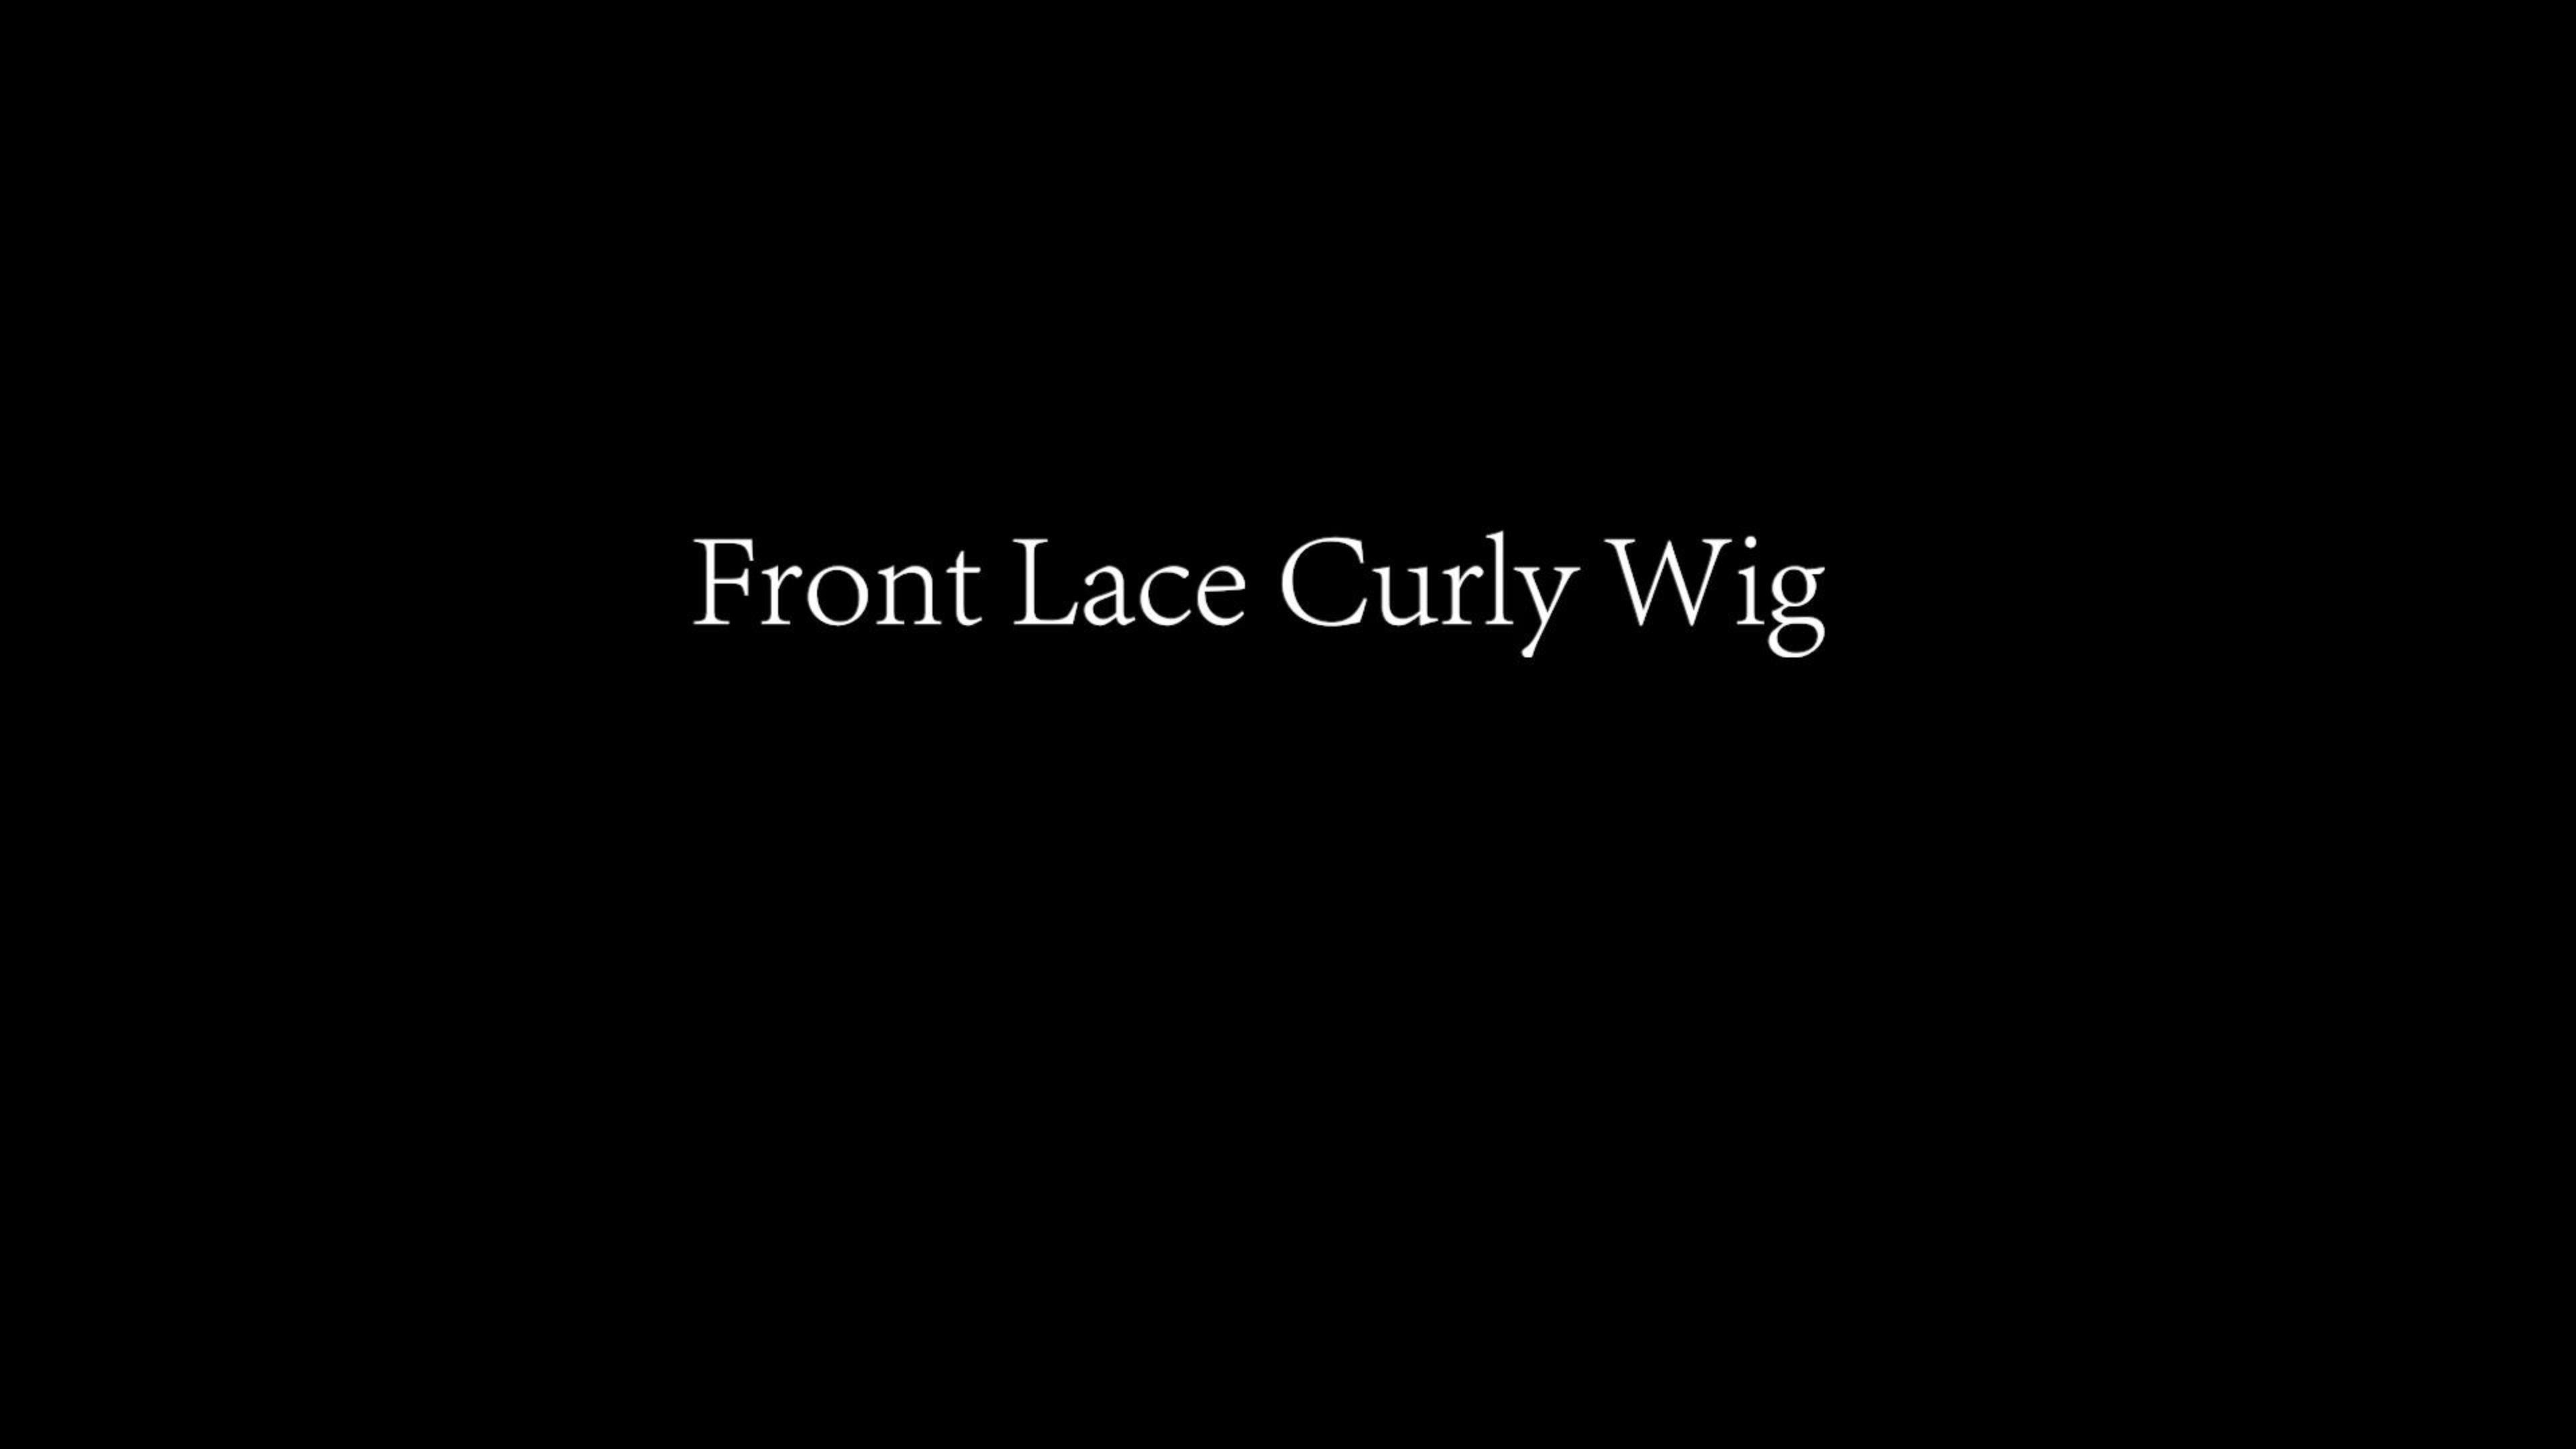 A Front Lace Curly Wig You're Worth A Try